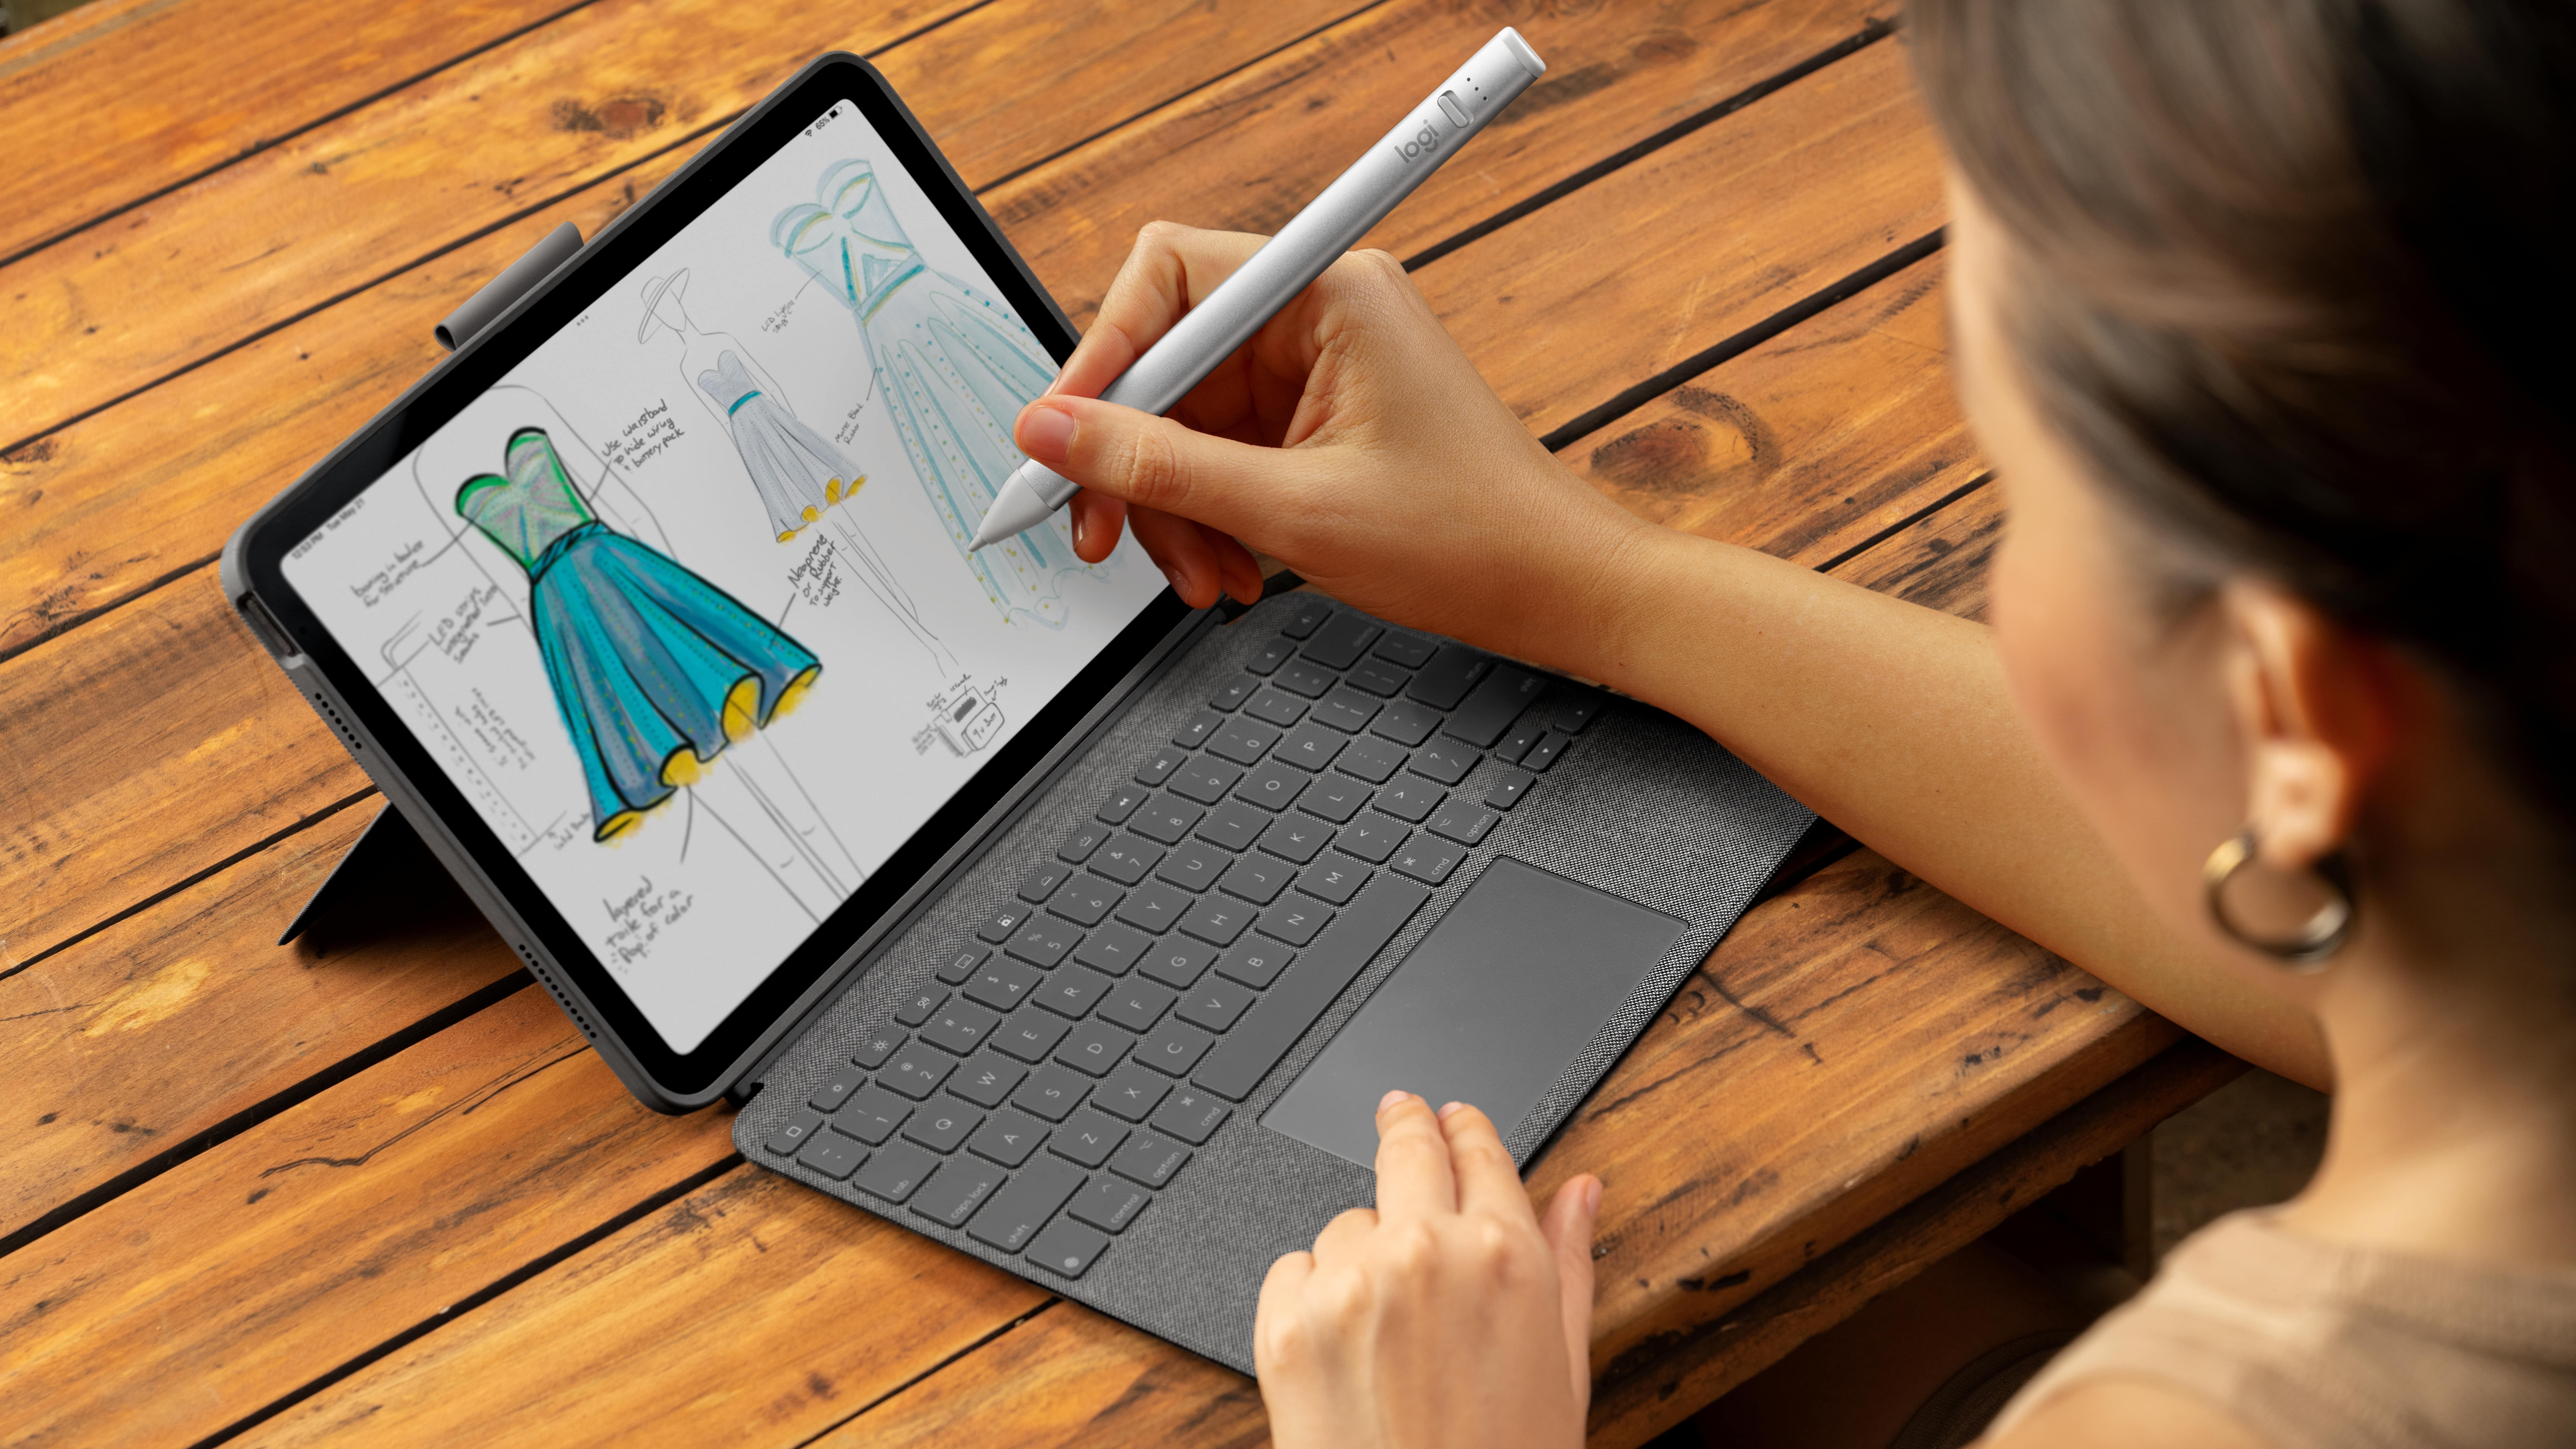 The Logitech Combo Touch Keyboard Case with trackpad and Logitech Crayon is used by a fashion designer on an iPad.